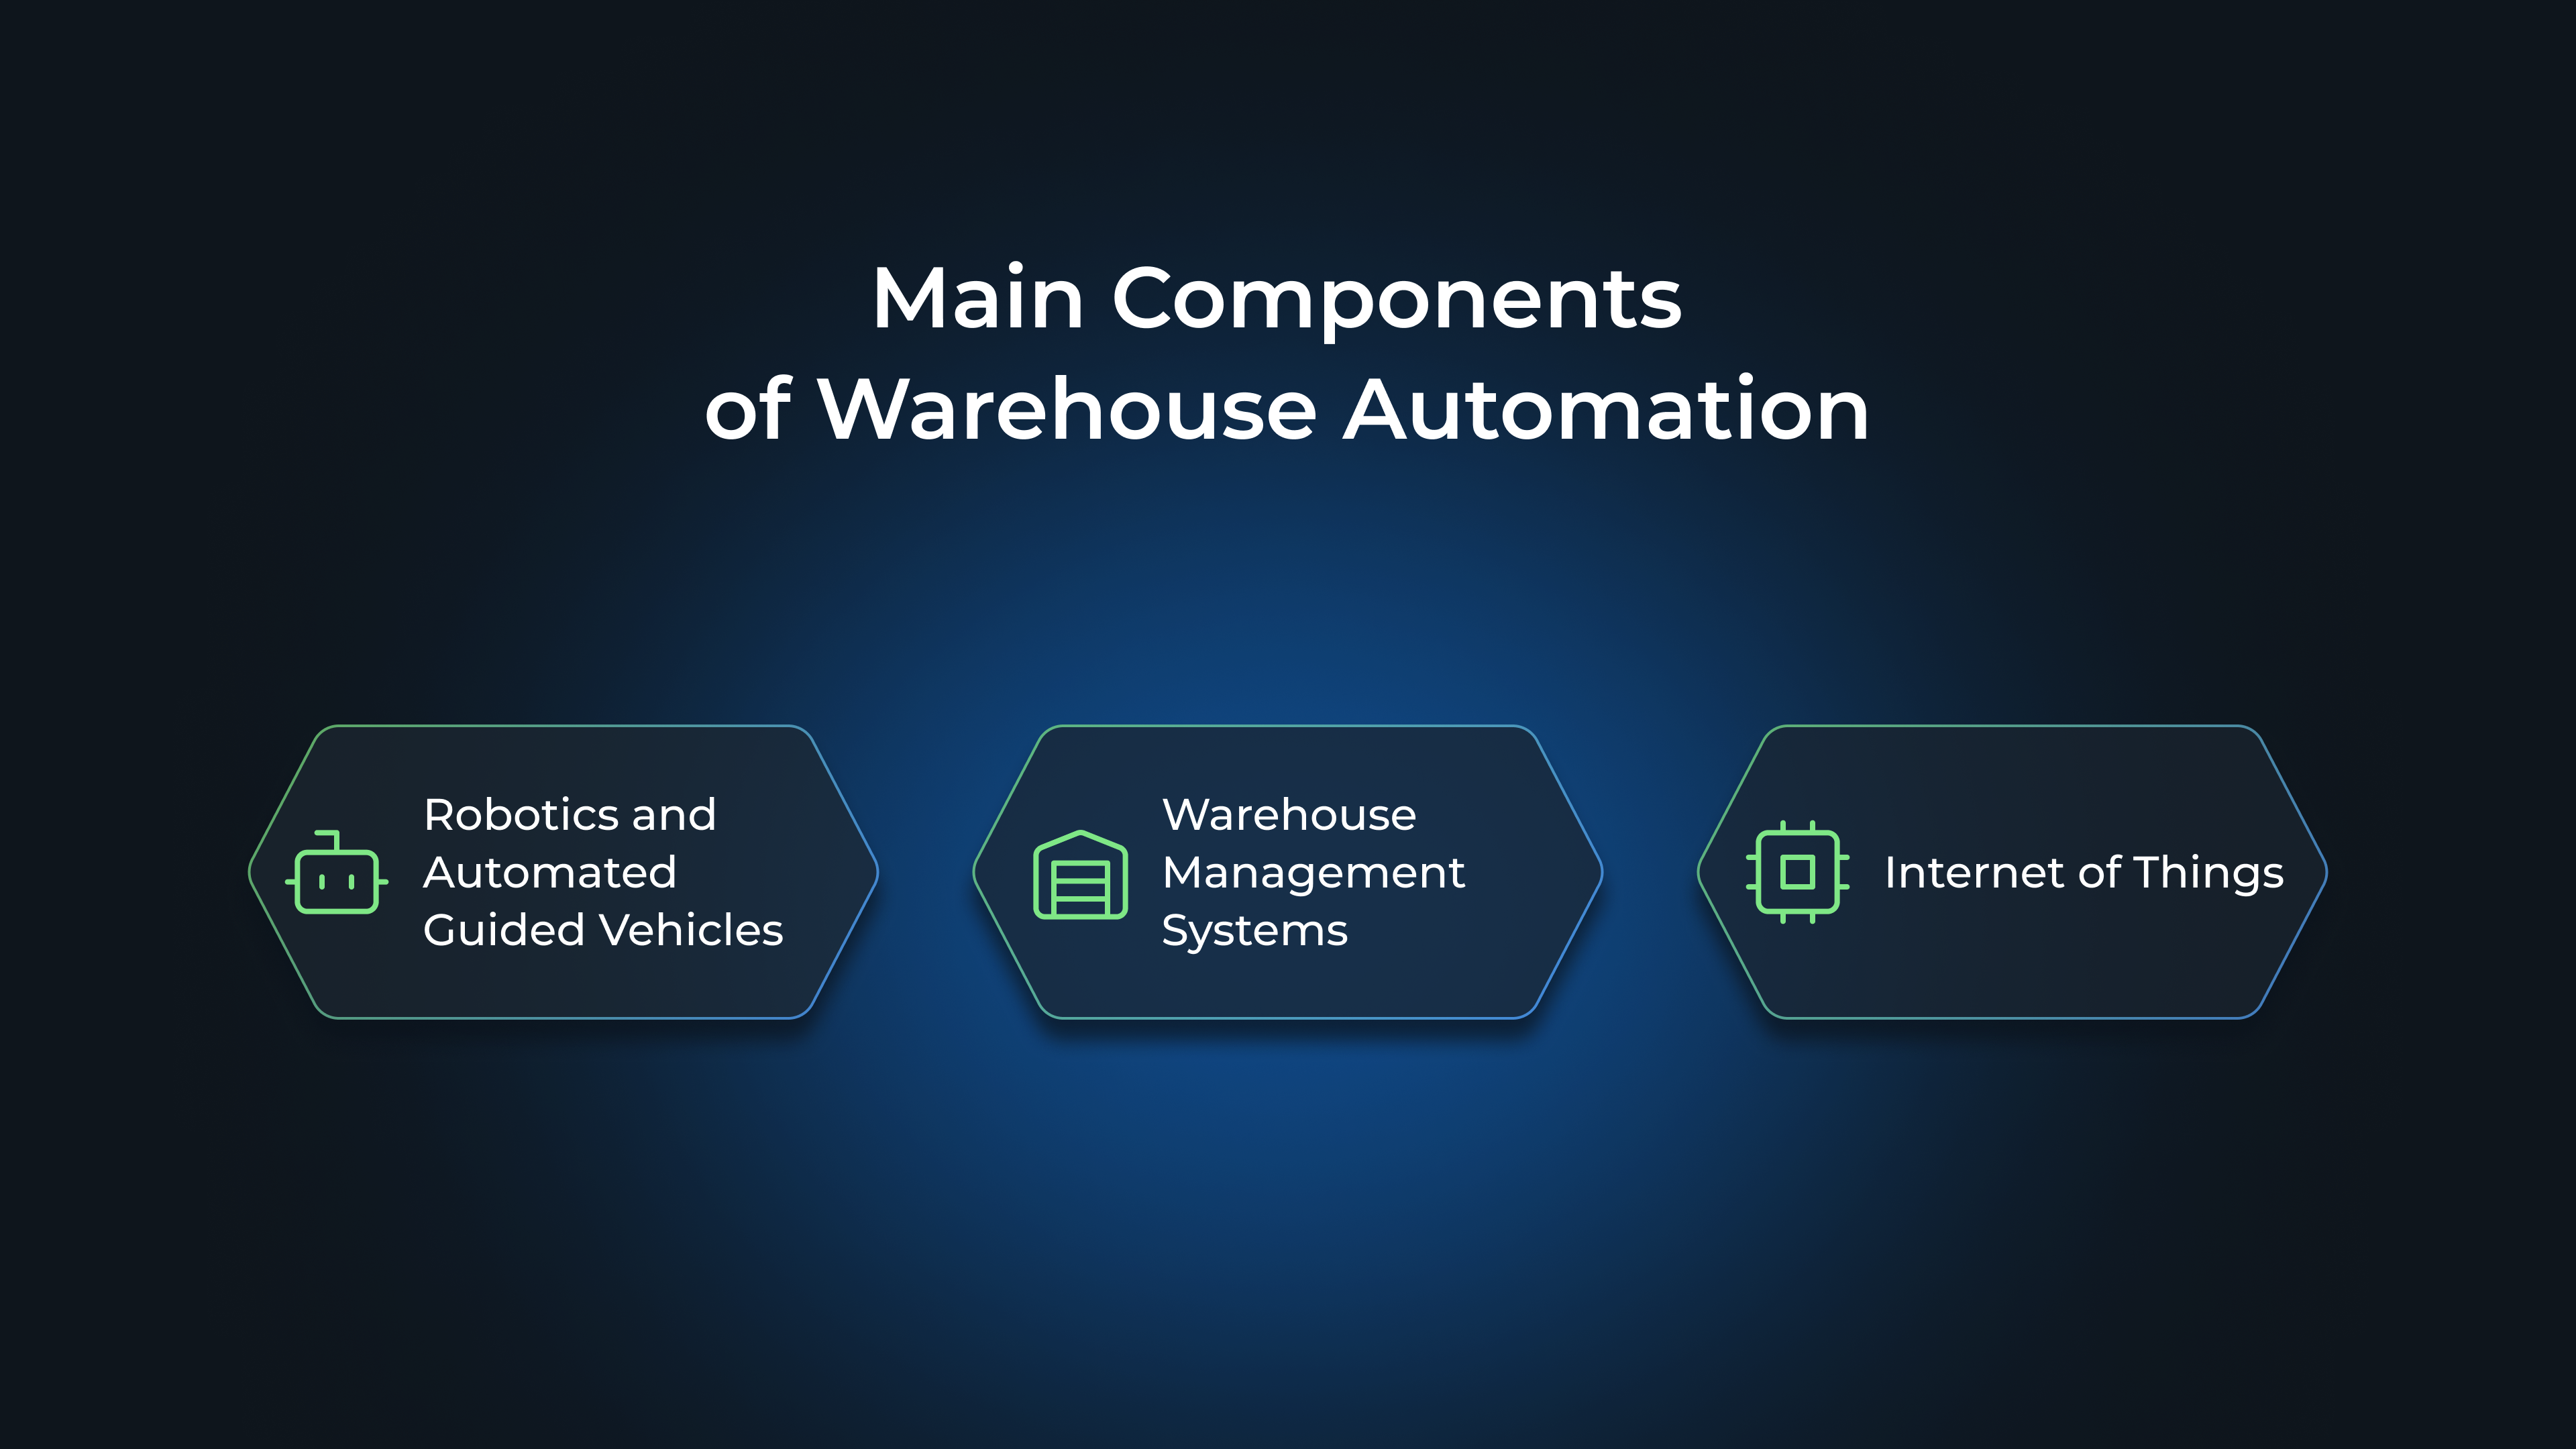 Main Components of Warehouse Automation: Robotics and Automated Guided Vehicles, Warehouse Management Systems, Internet of Things 
